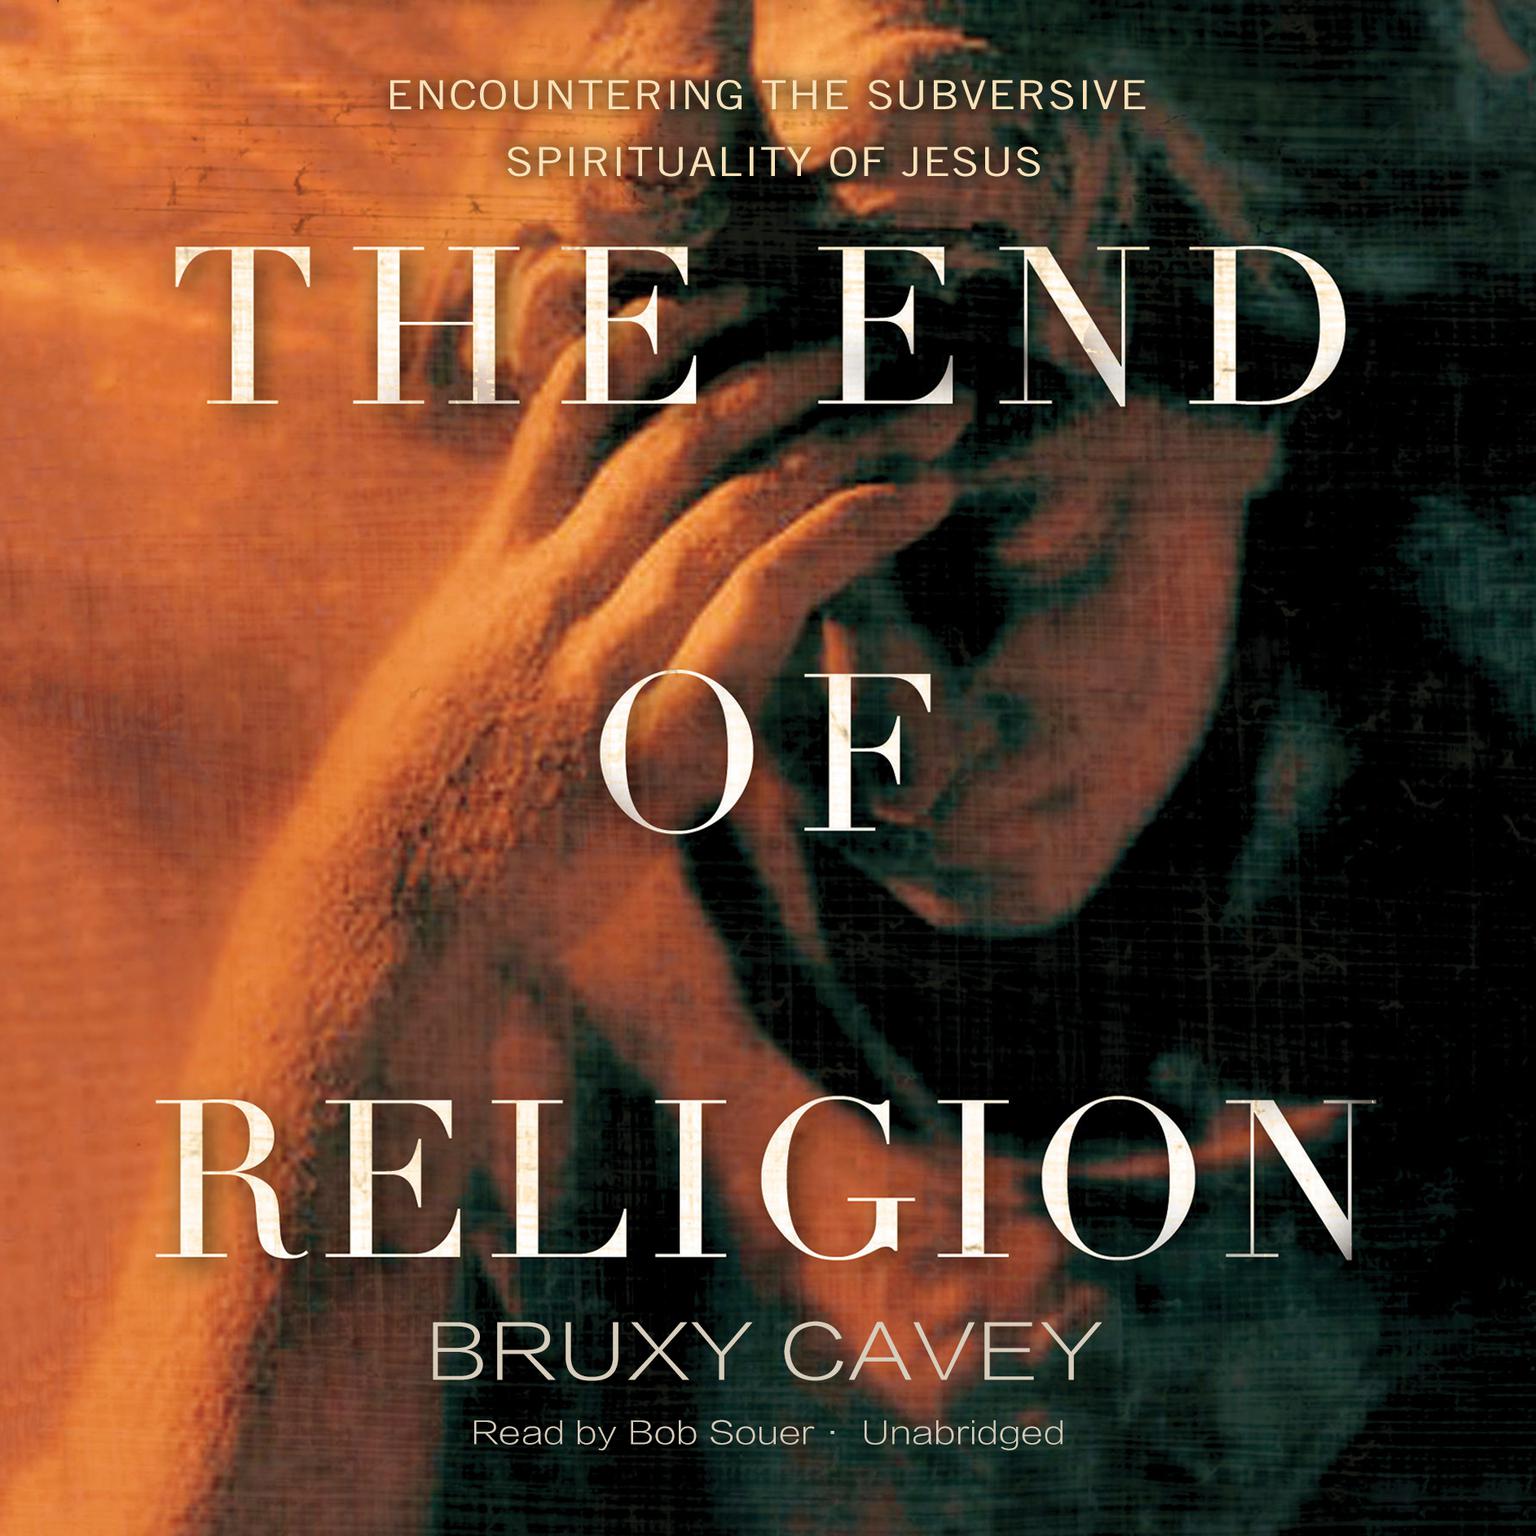 The End of Religion: Encountering the Subversive Spirituality of Jesus Audiobook, by Bruxy Cavey